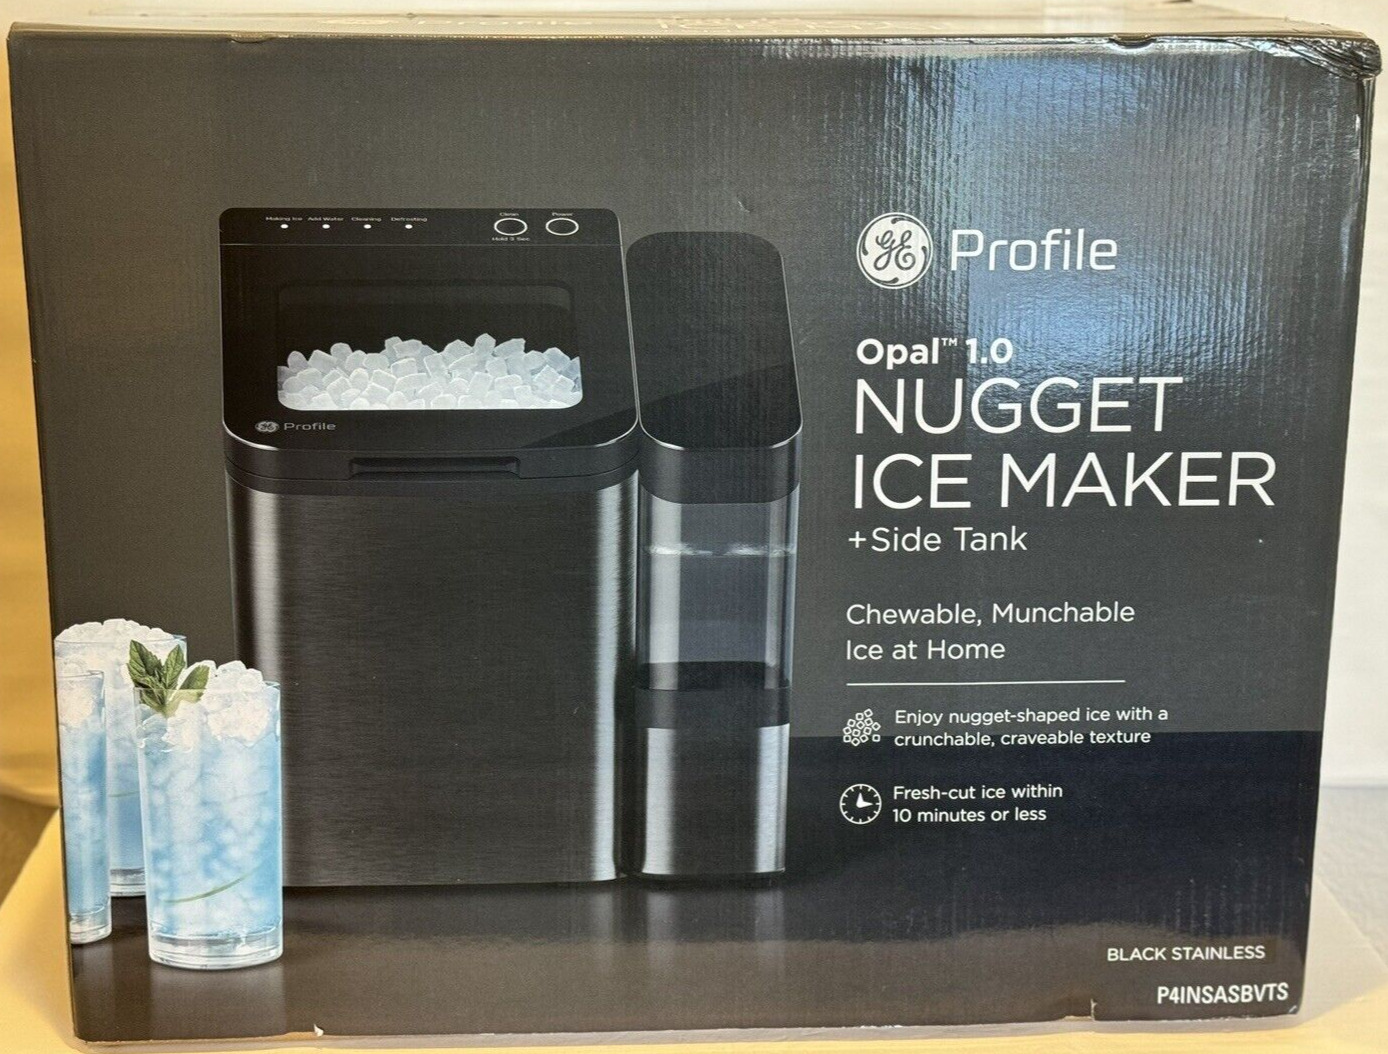 GE Profile Opal 1.0 Portable Ice maker + Nugget Ice Production + Side Tank Black